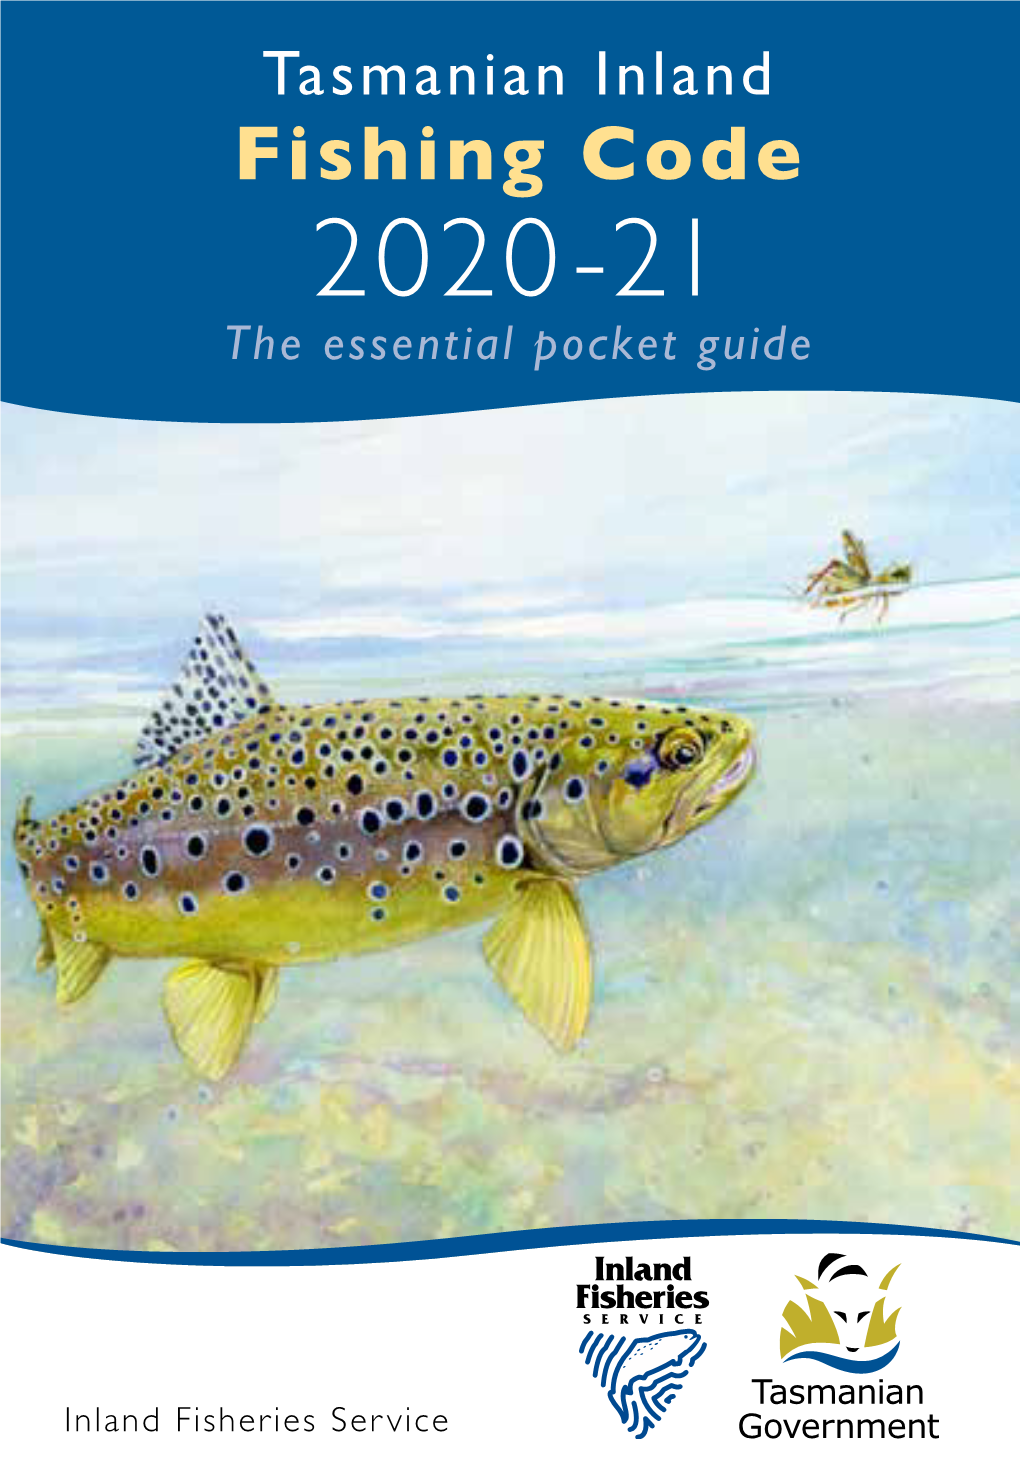 Tasmanian Inland Fishing Code 2020-21 the Essential Pocket Guide